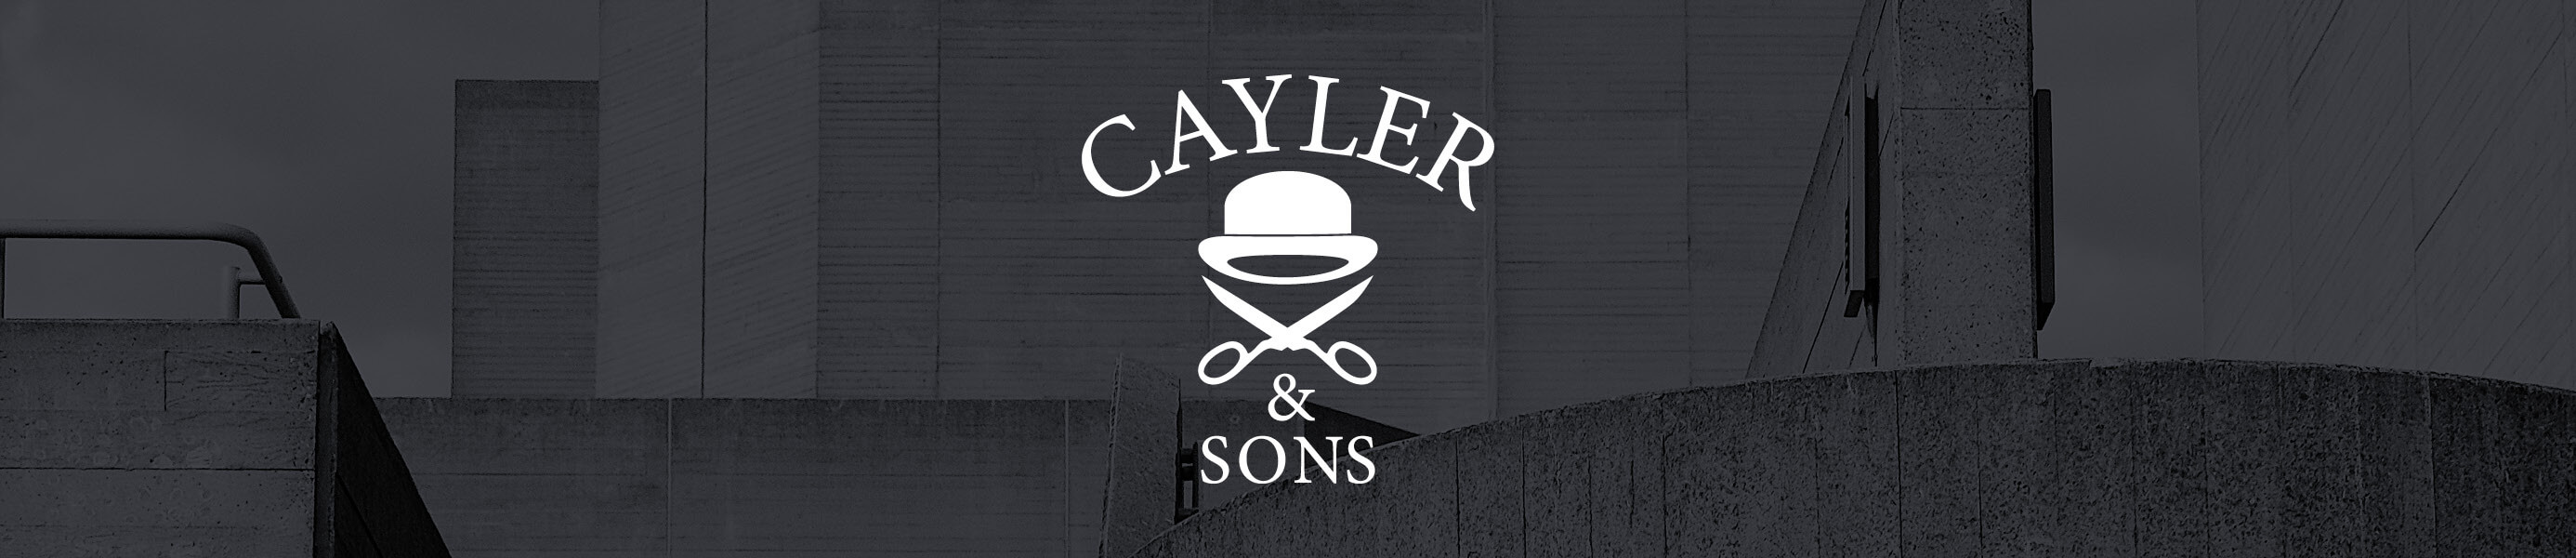 Cayler and Sons